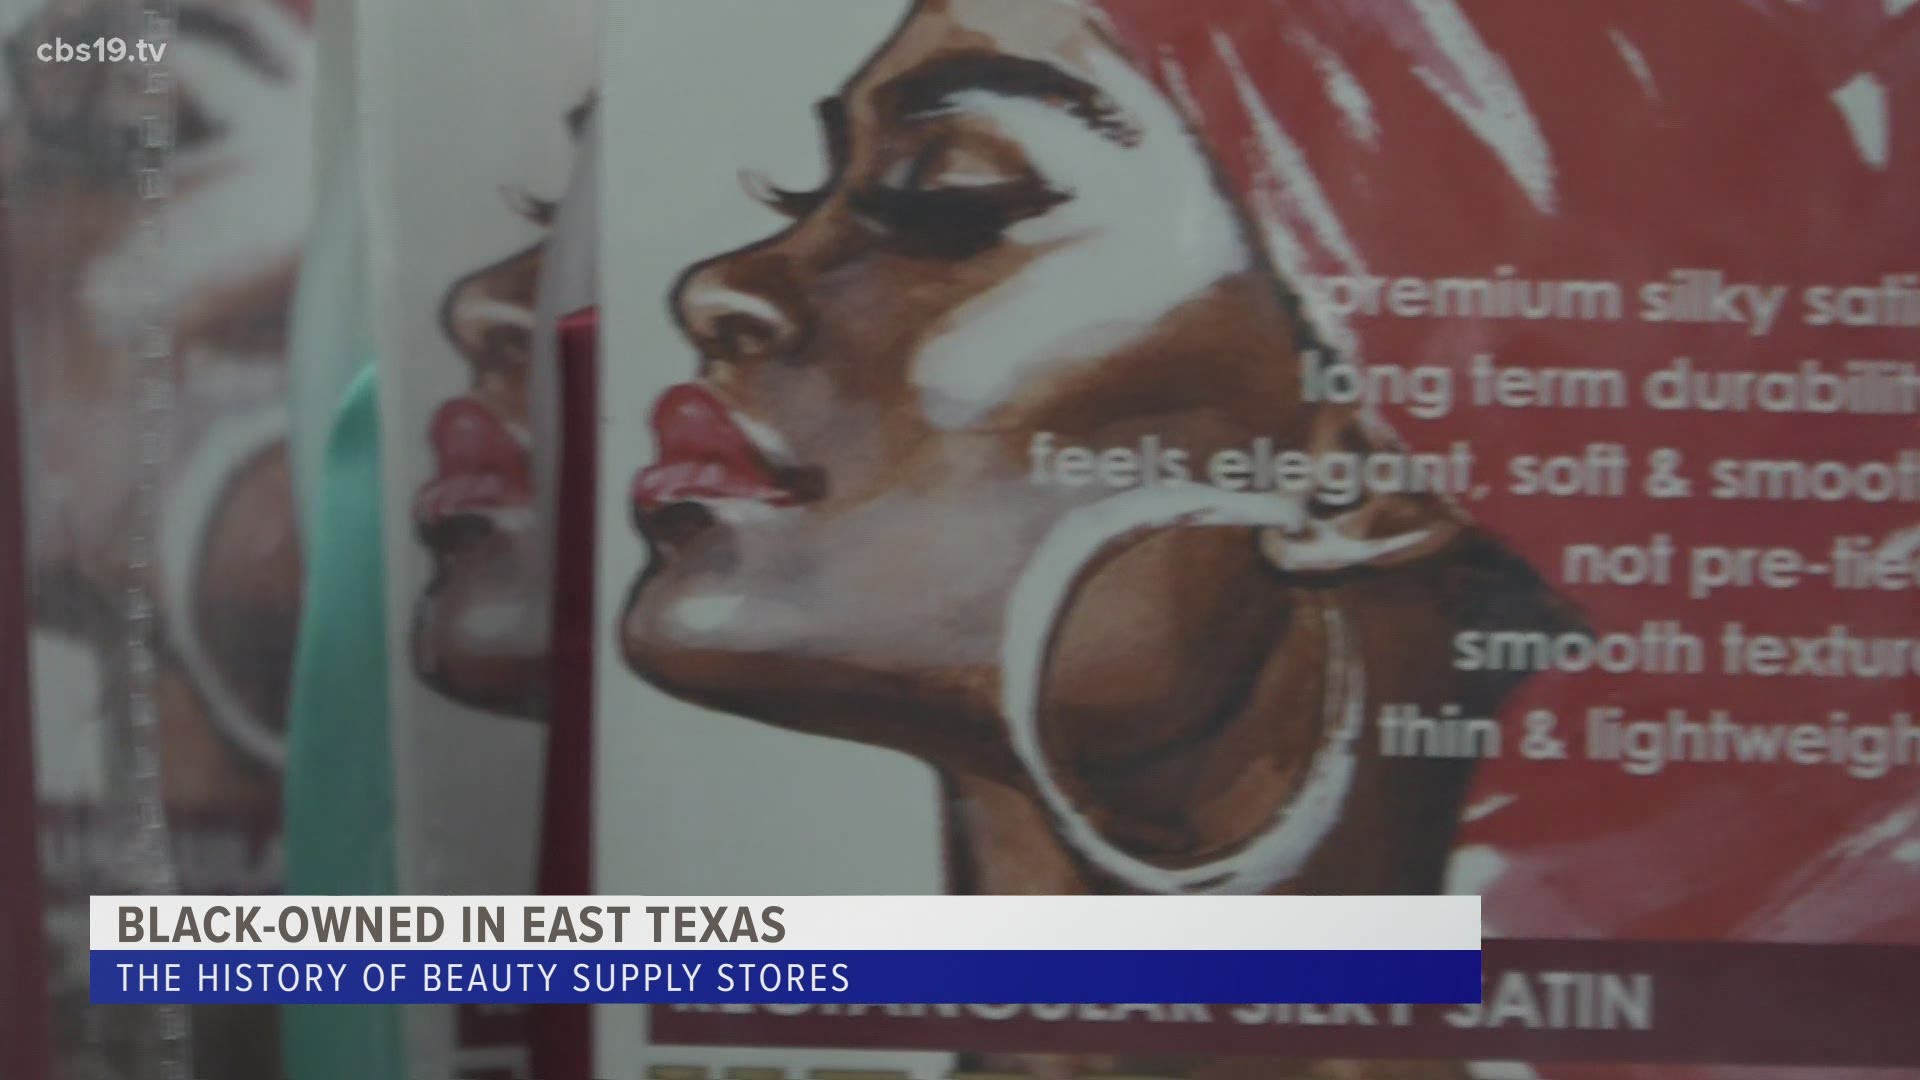 Black-owned in East Texas: The history of beauty supply stores